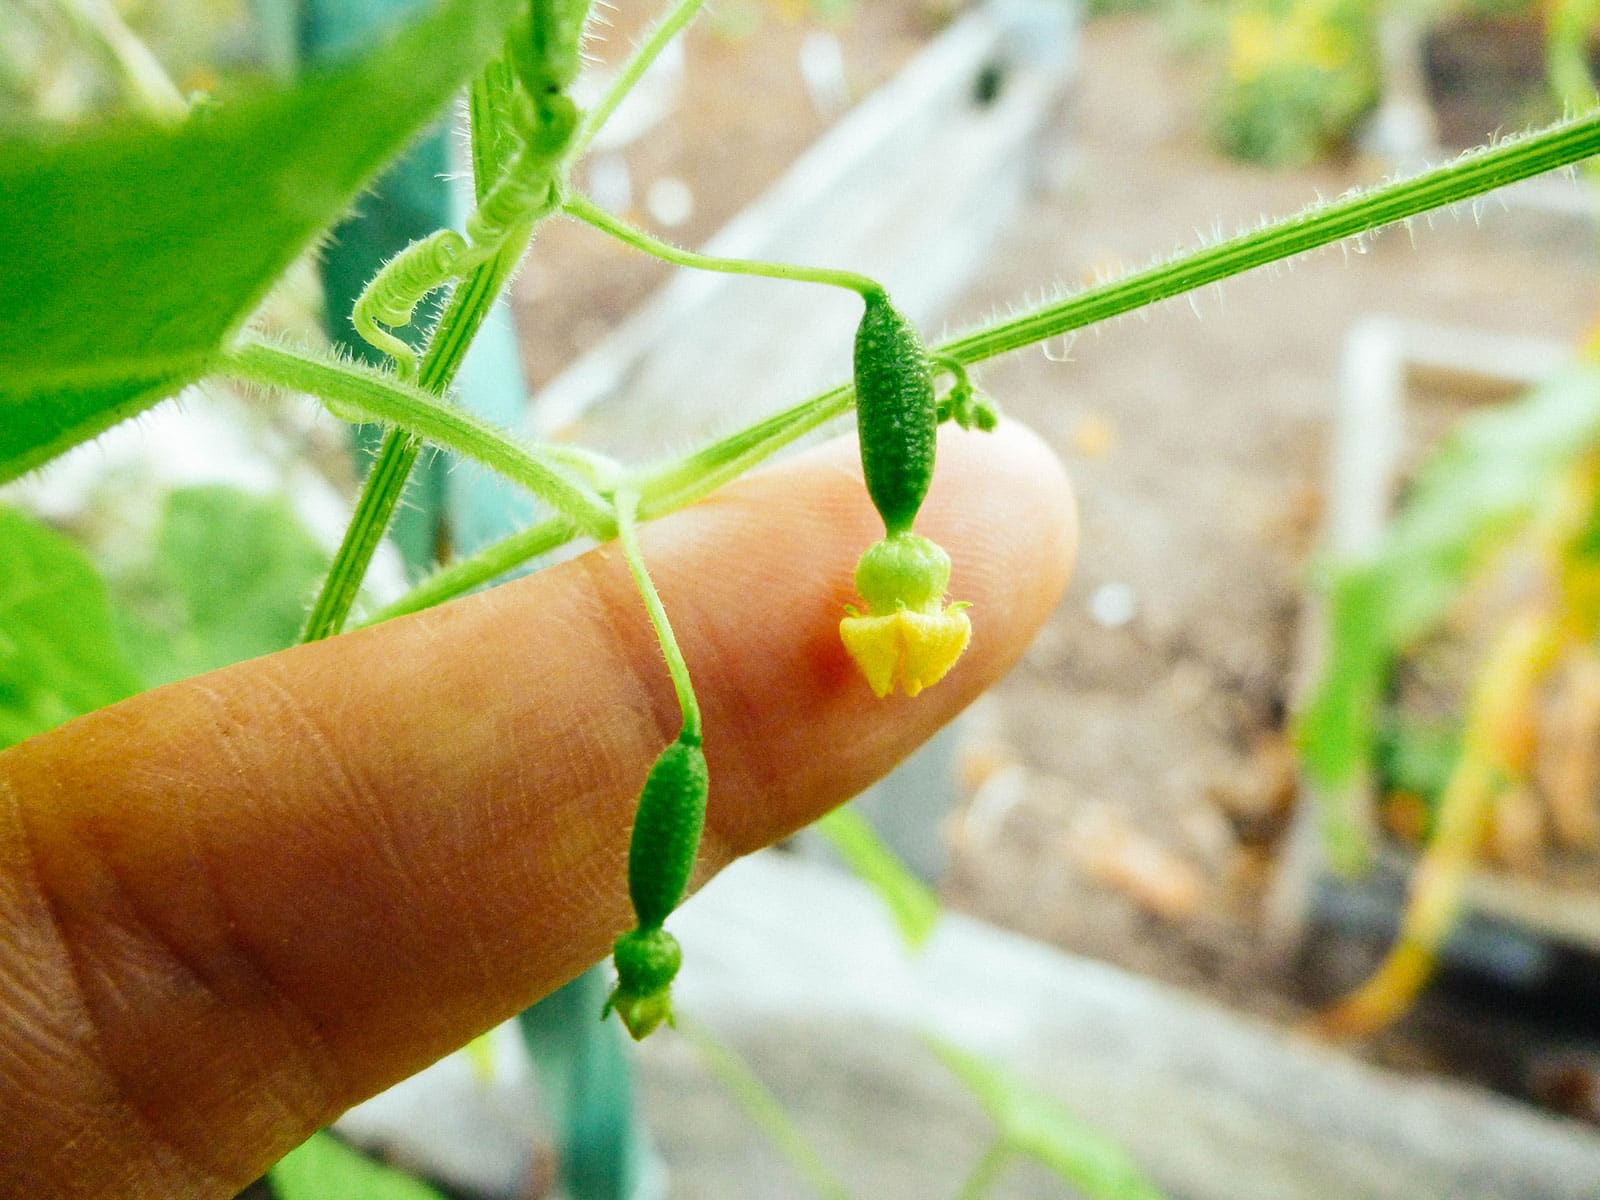 Finger placed behind tiny cucamelon fruits just beginning to form from yellow flowers